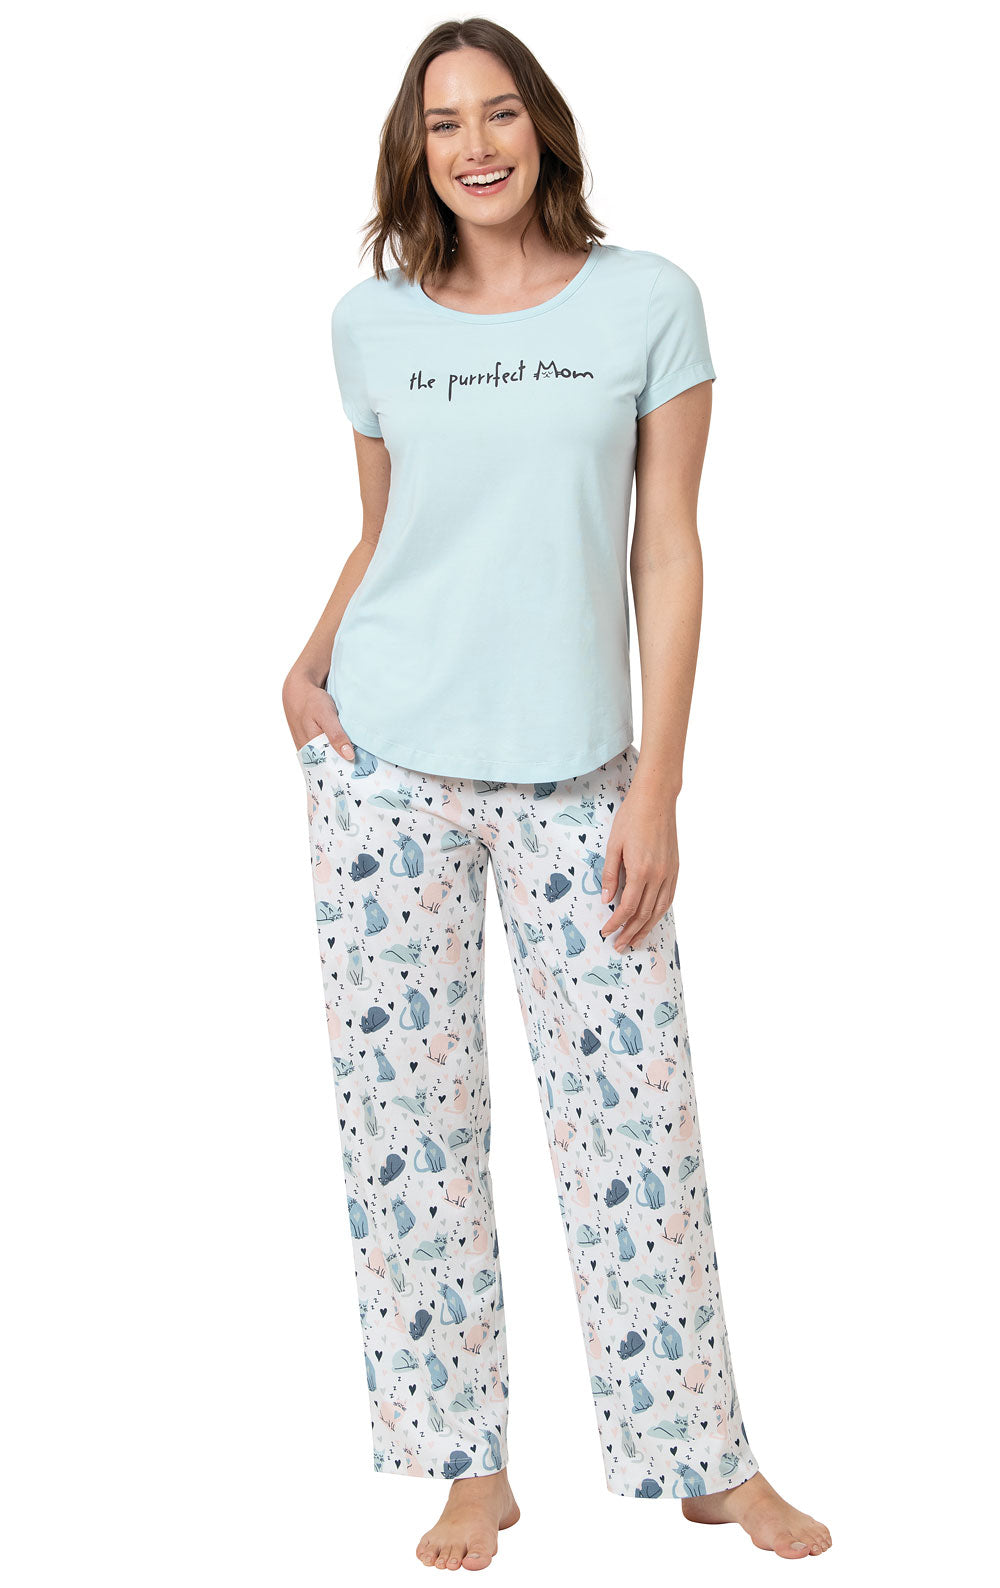 The Purrrfect Mom PJs